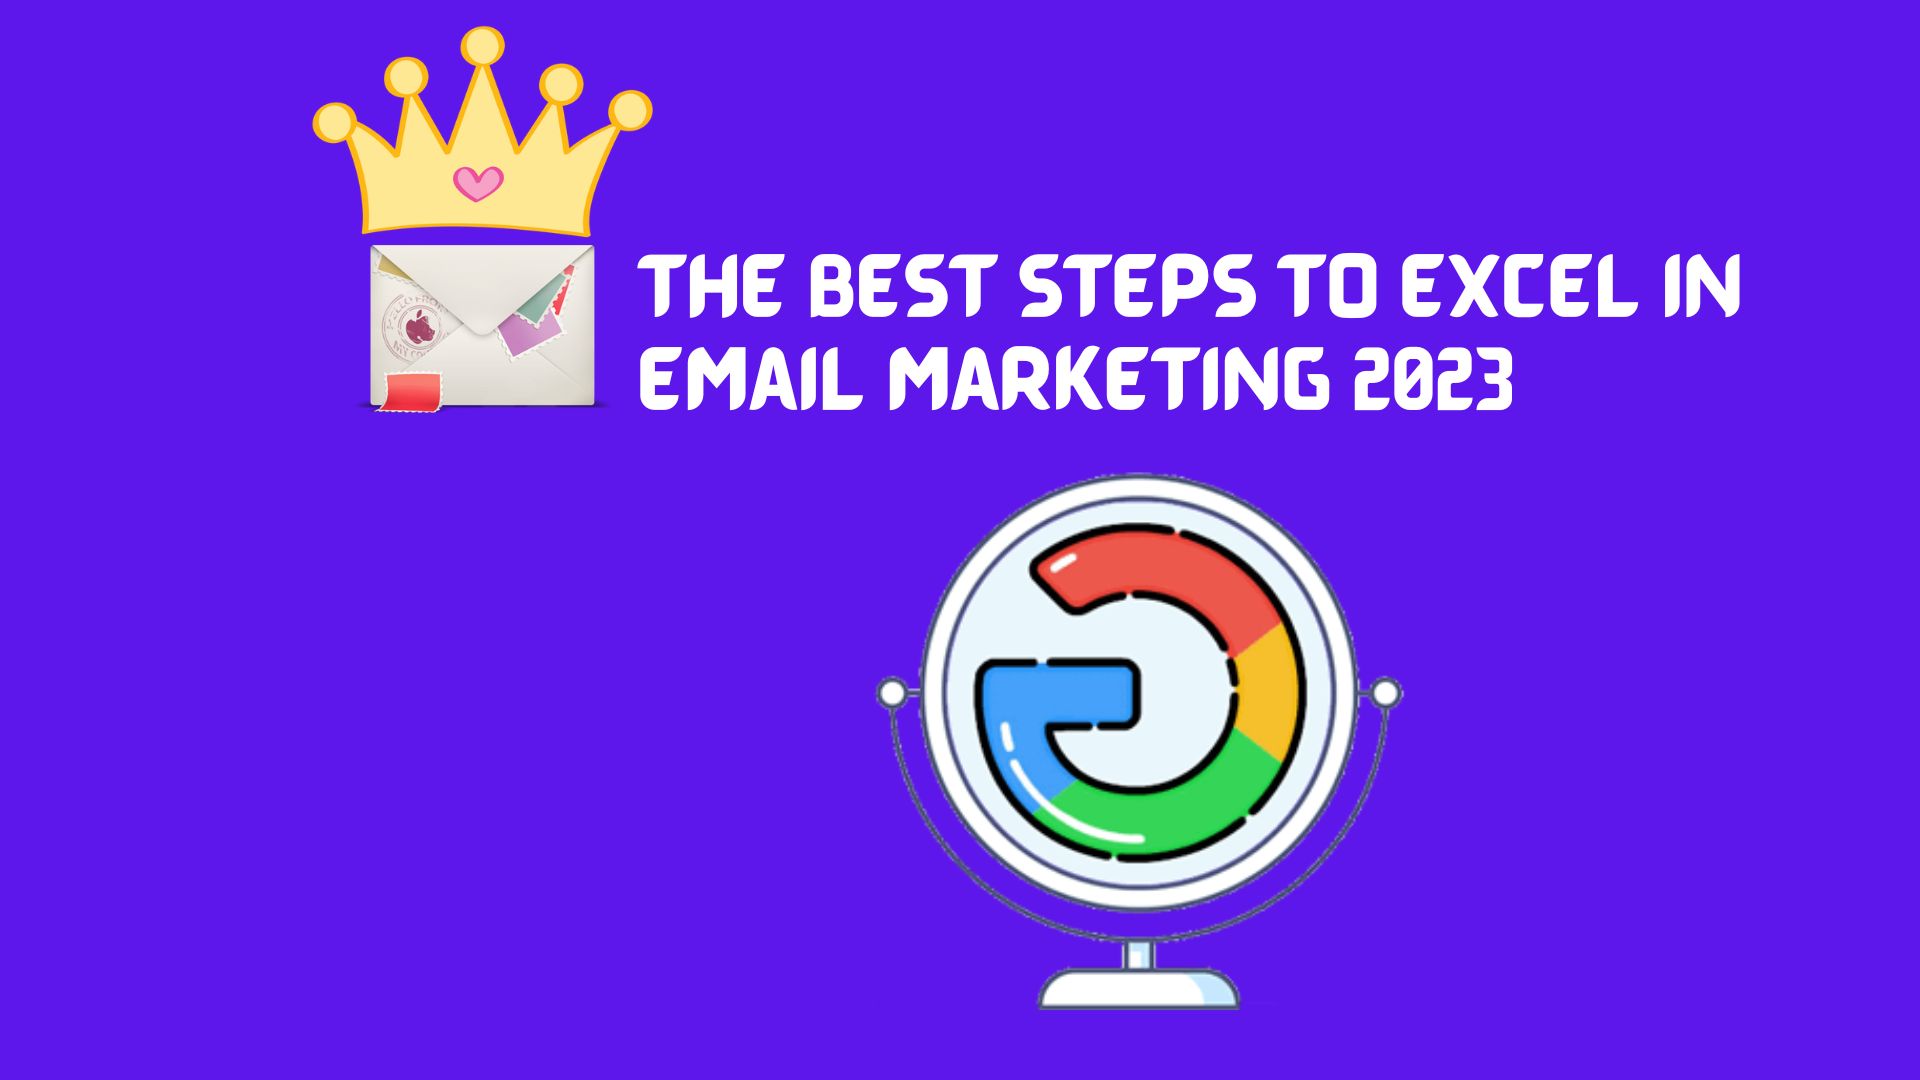 The best steps to excel in email marketing 2023